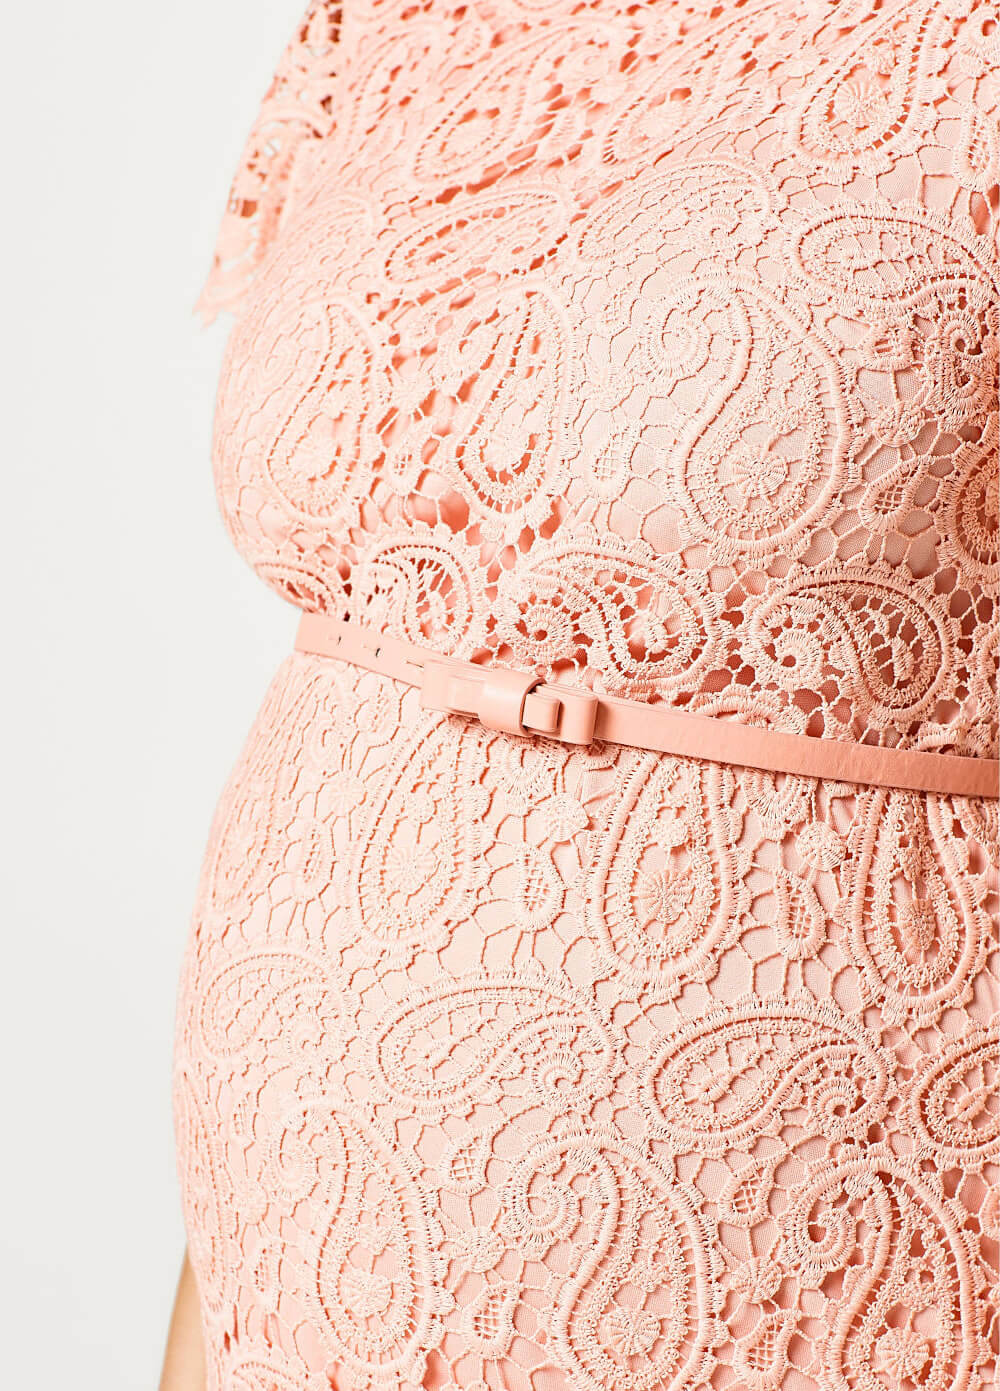 Rose Lace Maternity Cocktail Dress by Esprit